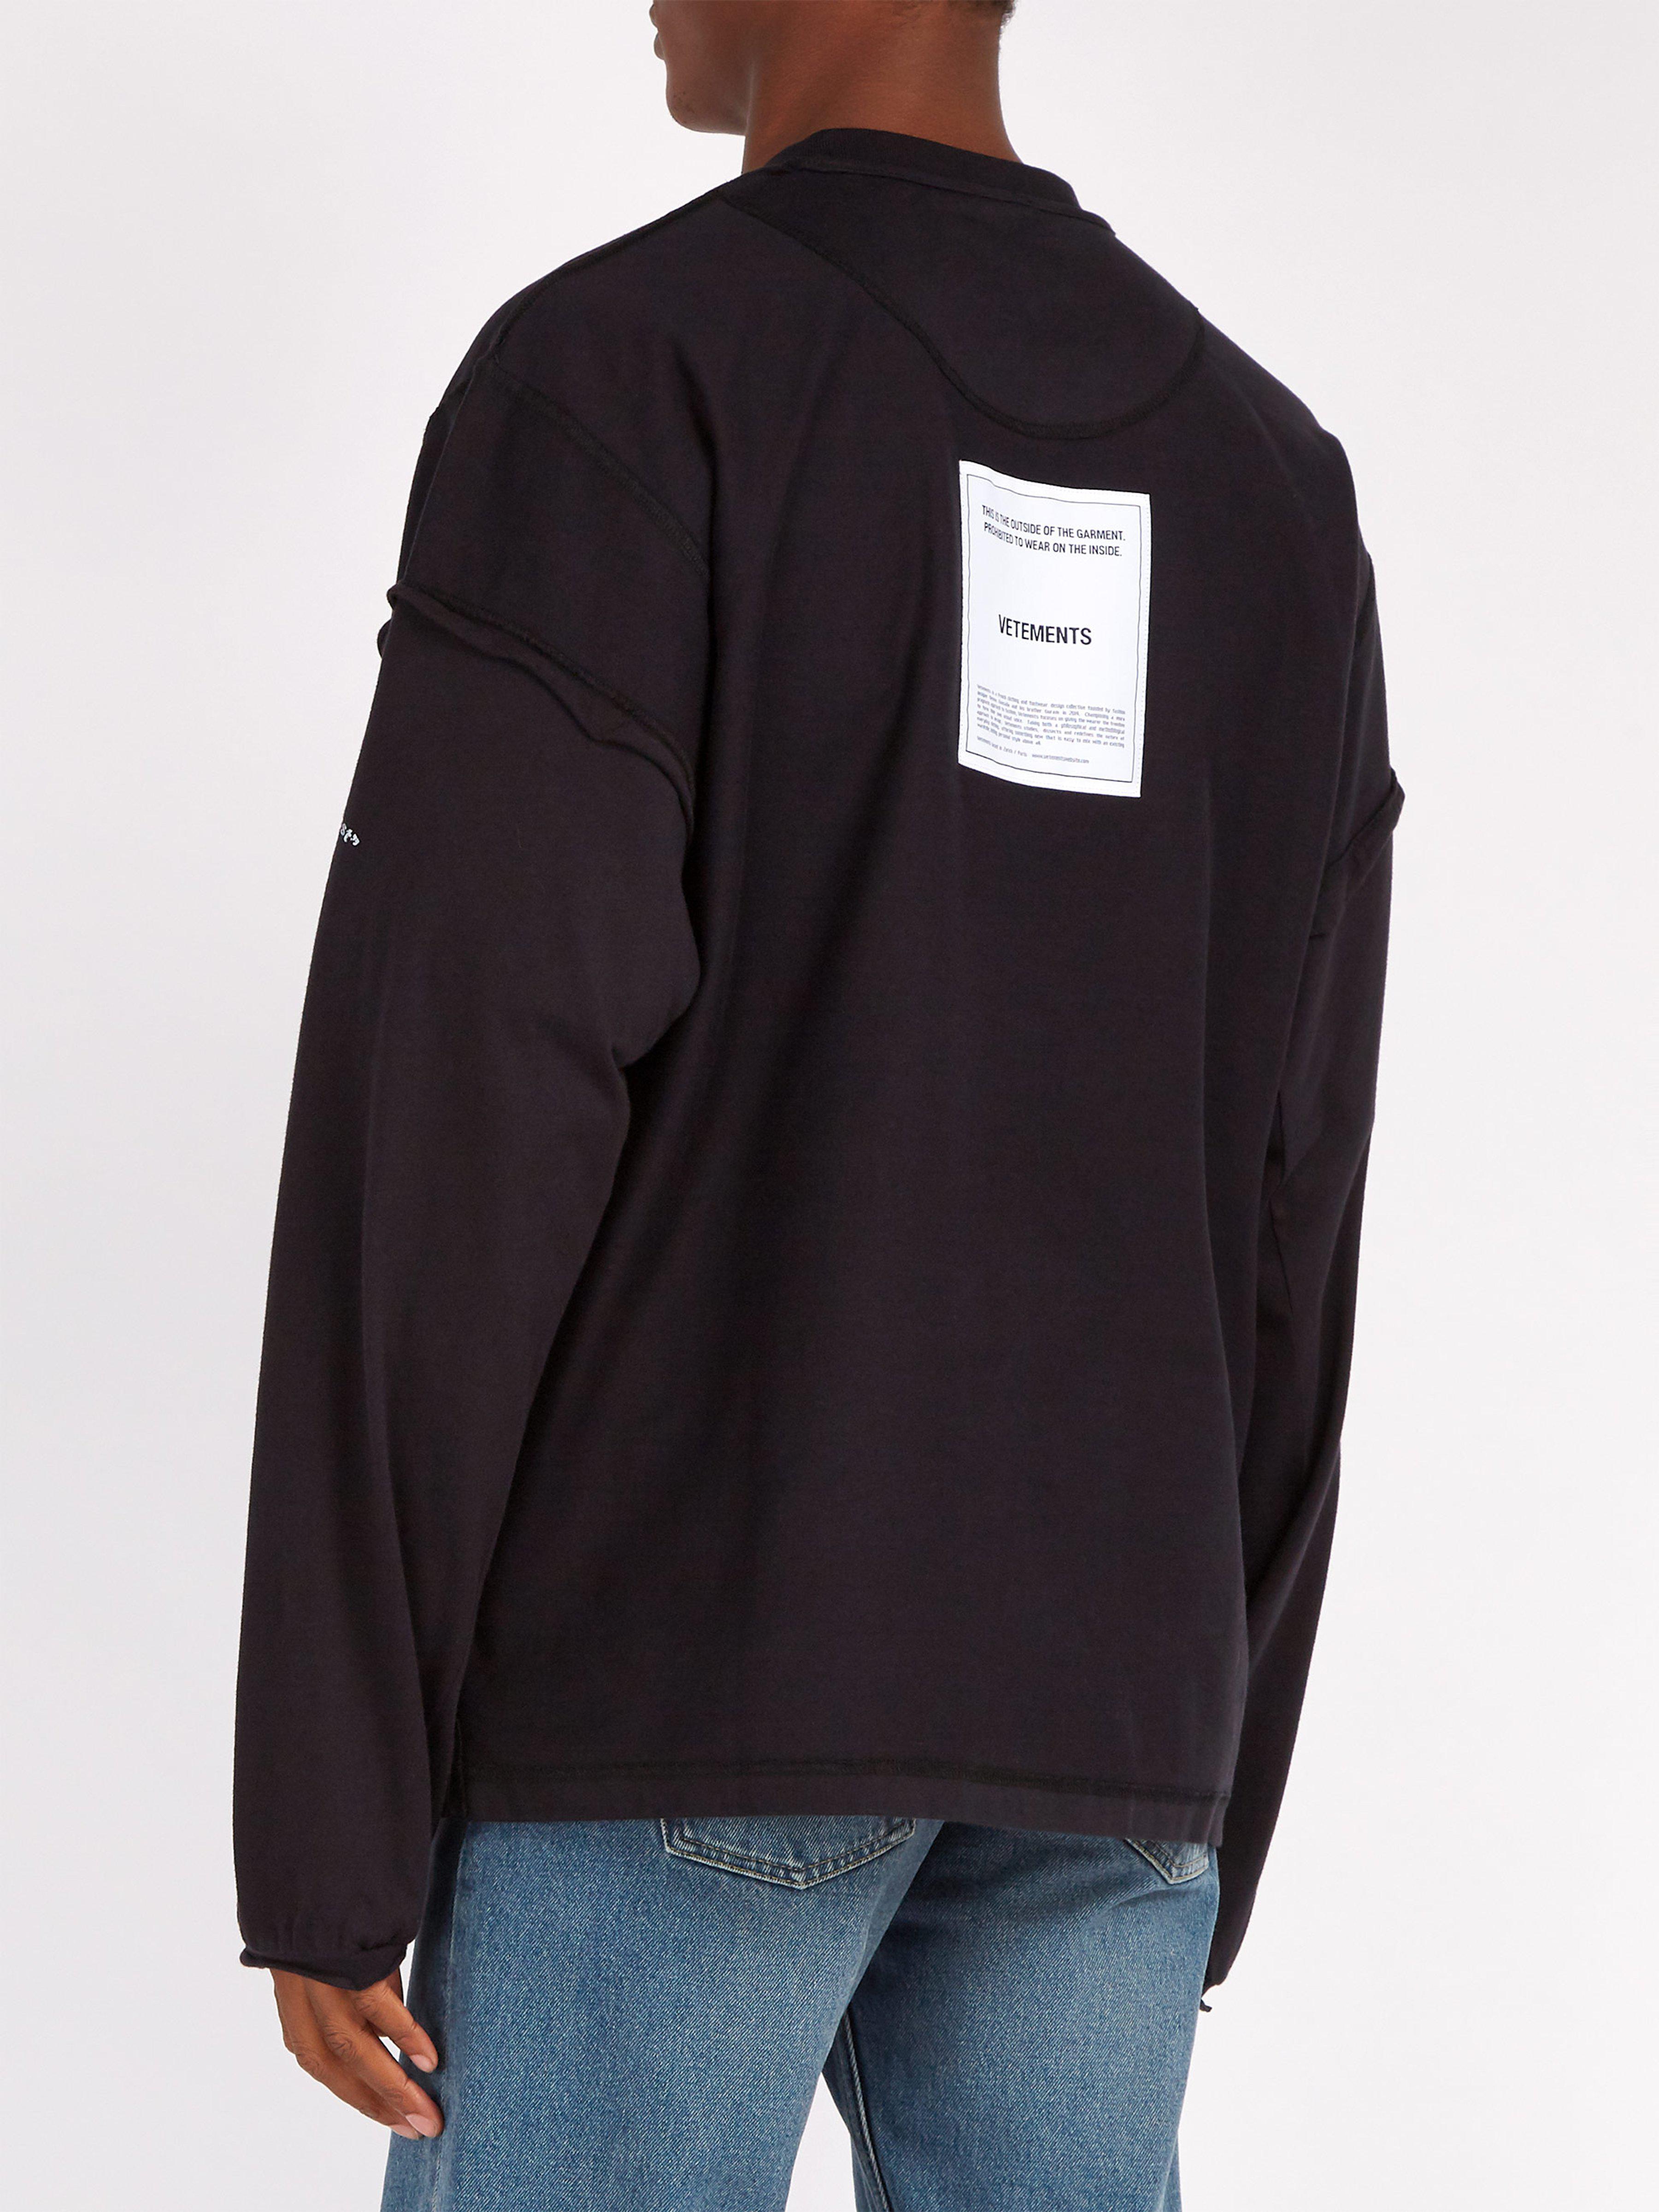 Inside-out Long Sleeve Cotton T-shirt